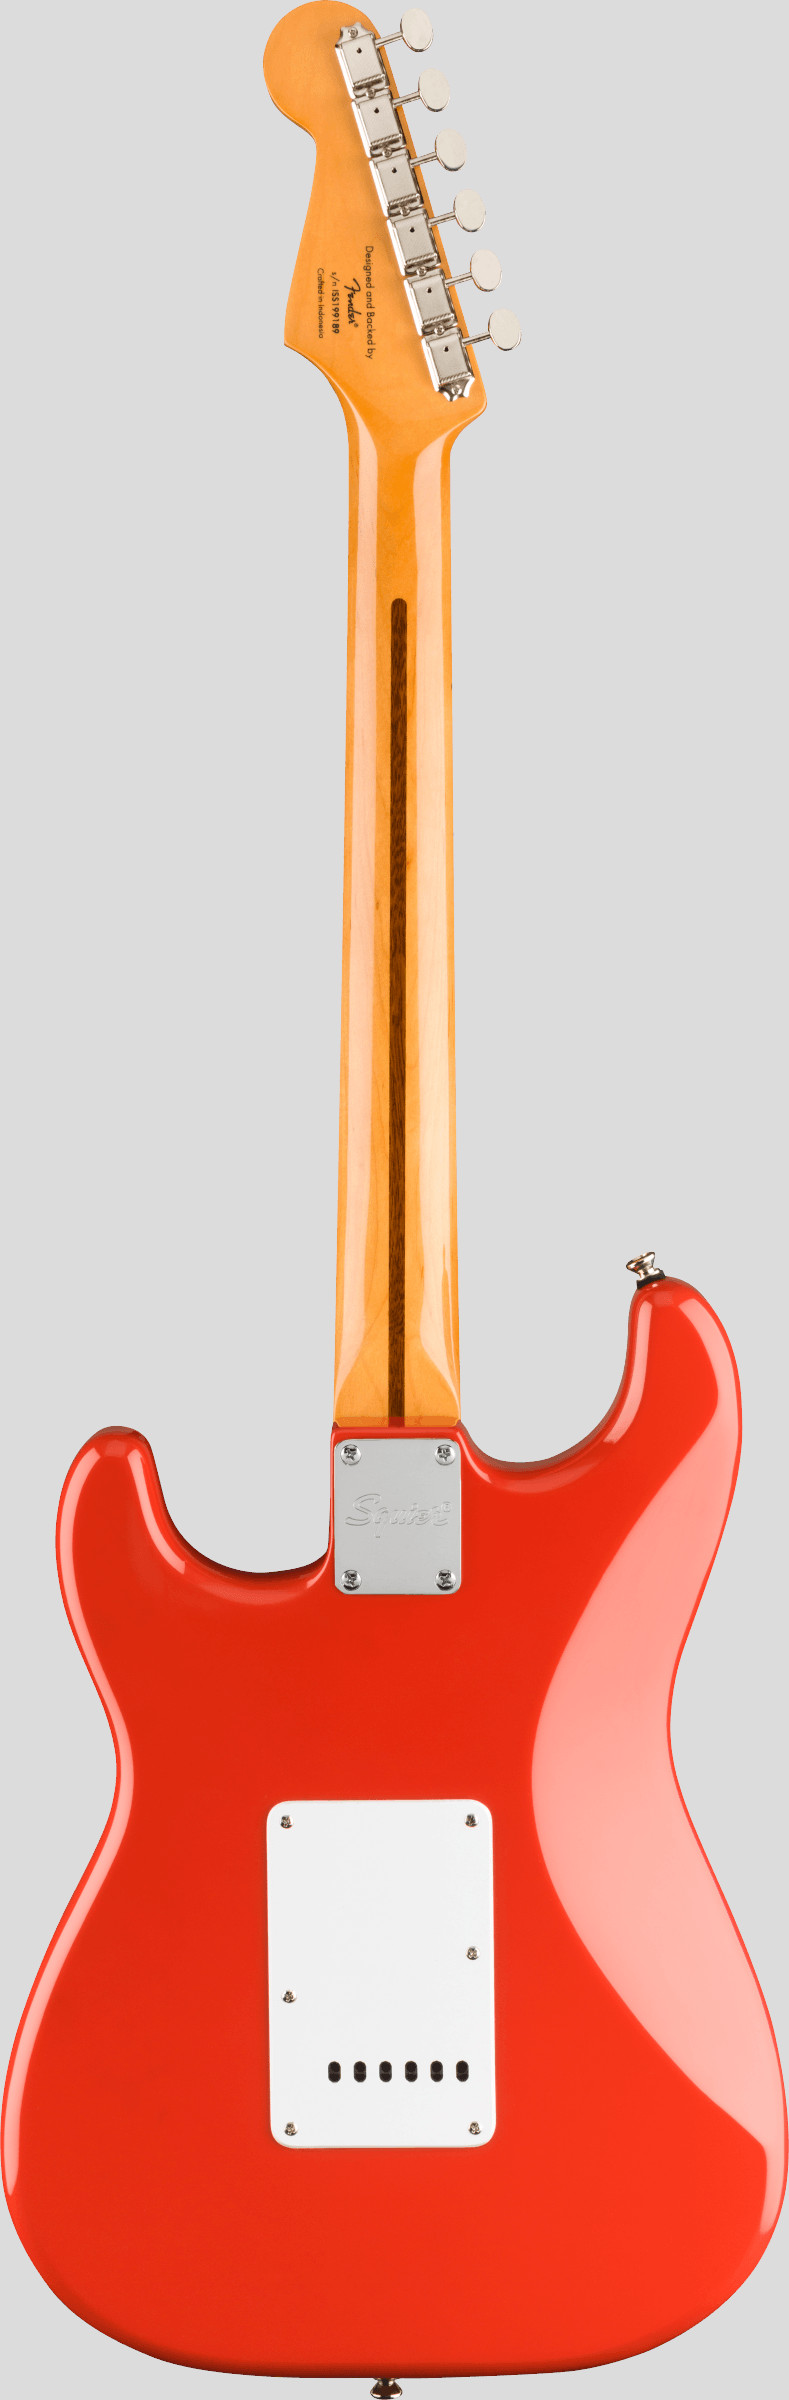 Squier by Fender Classic Vibe 50 Stratocaster Fiesta Red 2